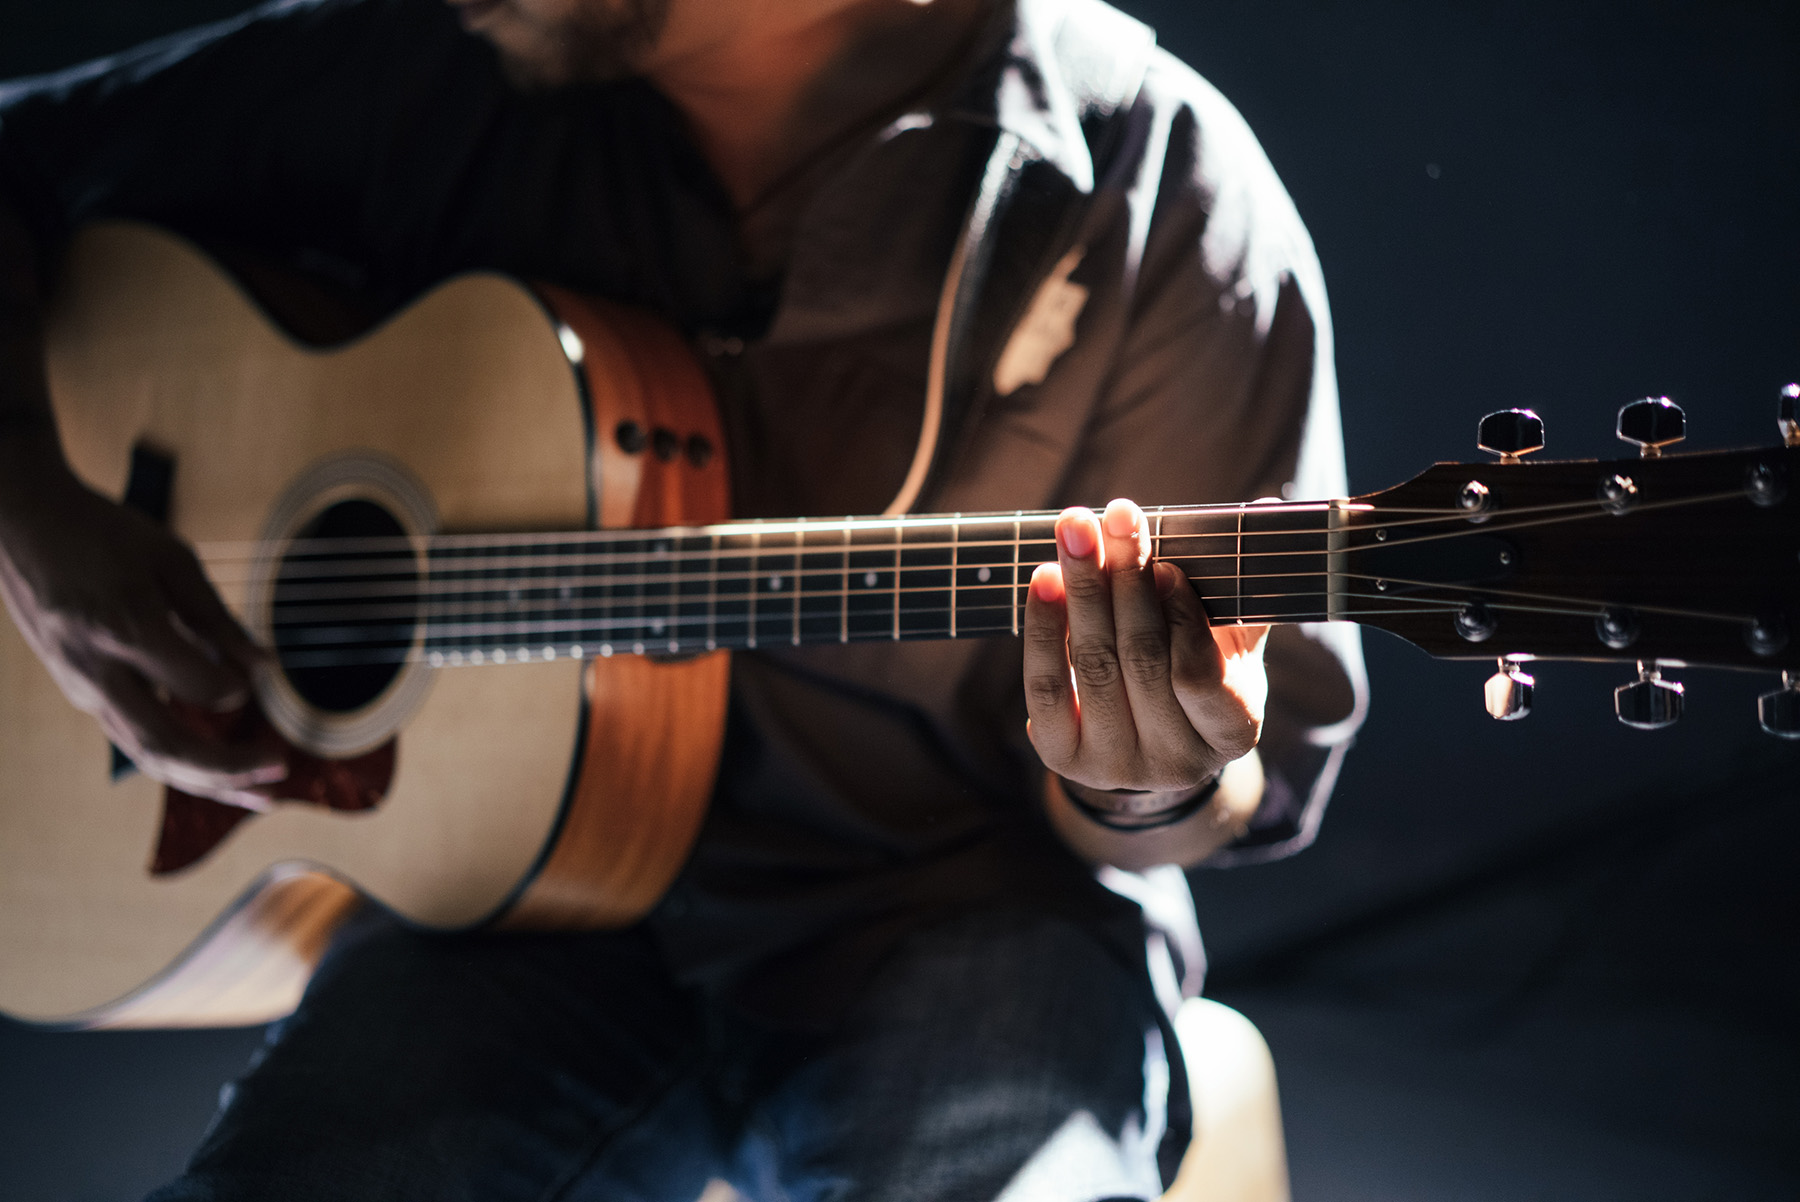 Stock photo of a seated person playing acoustic guitar (Image from Wikimedia Commons, courtesy of RawPixel.com)